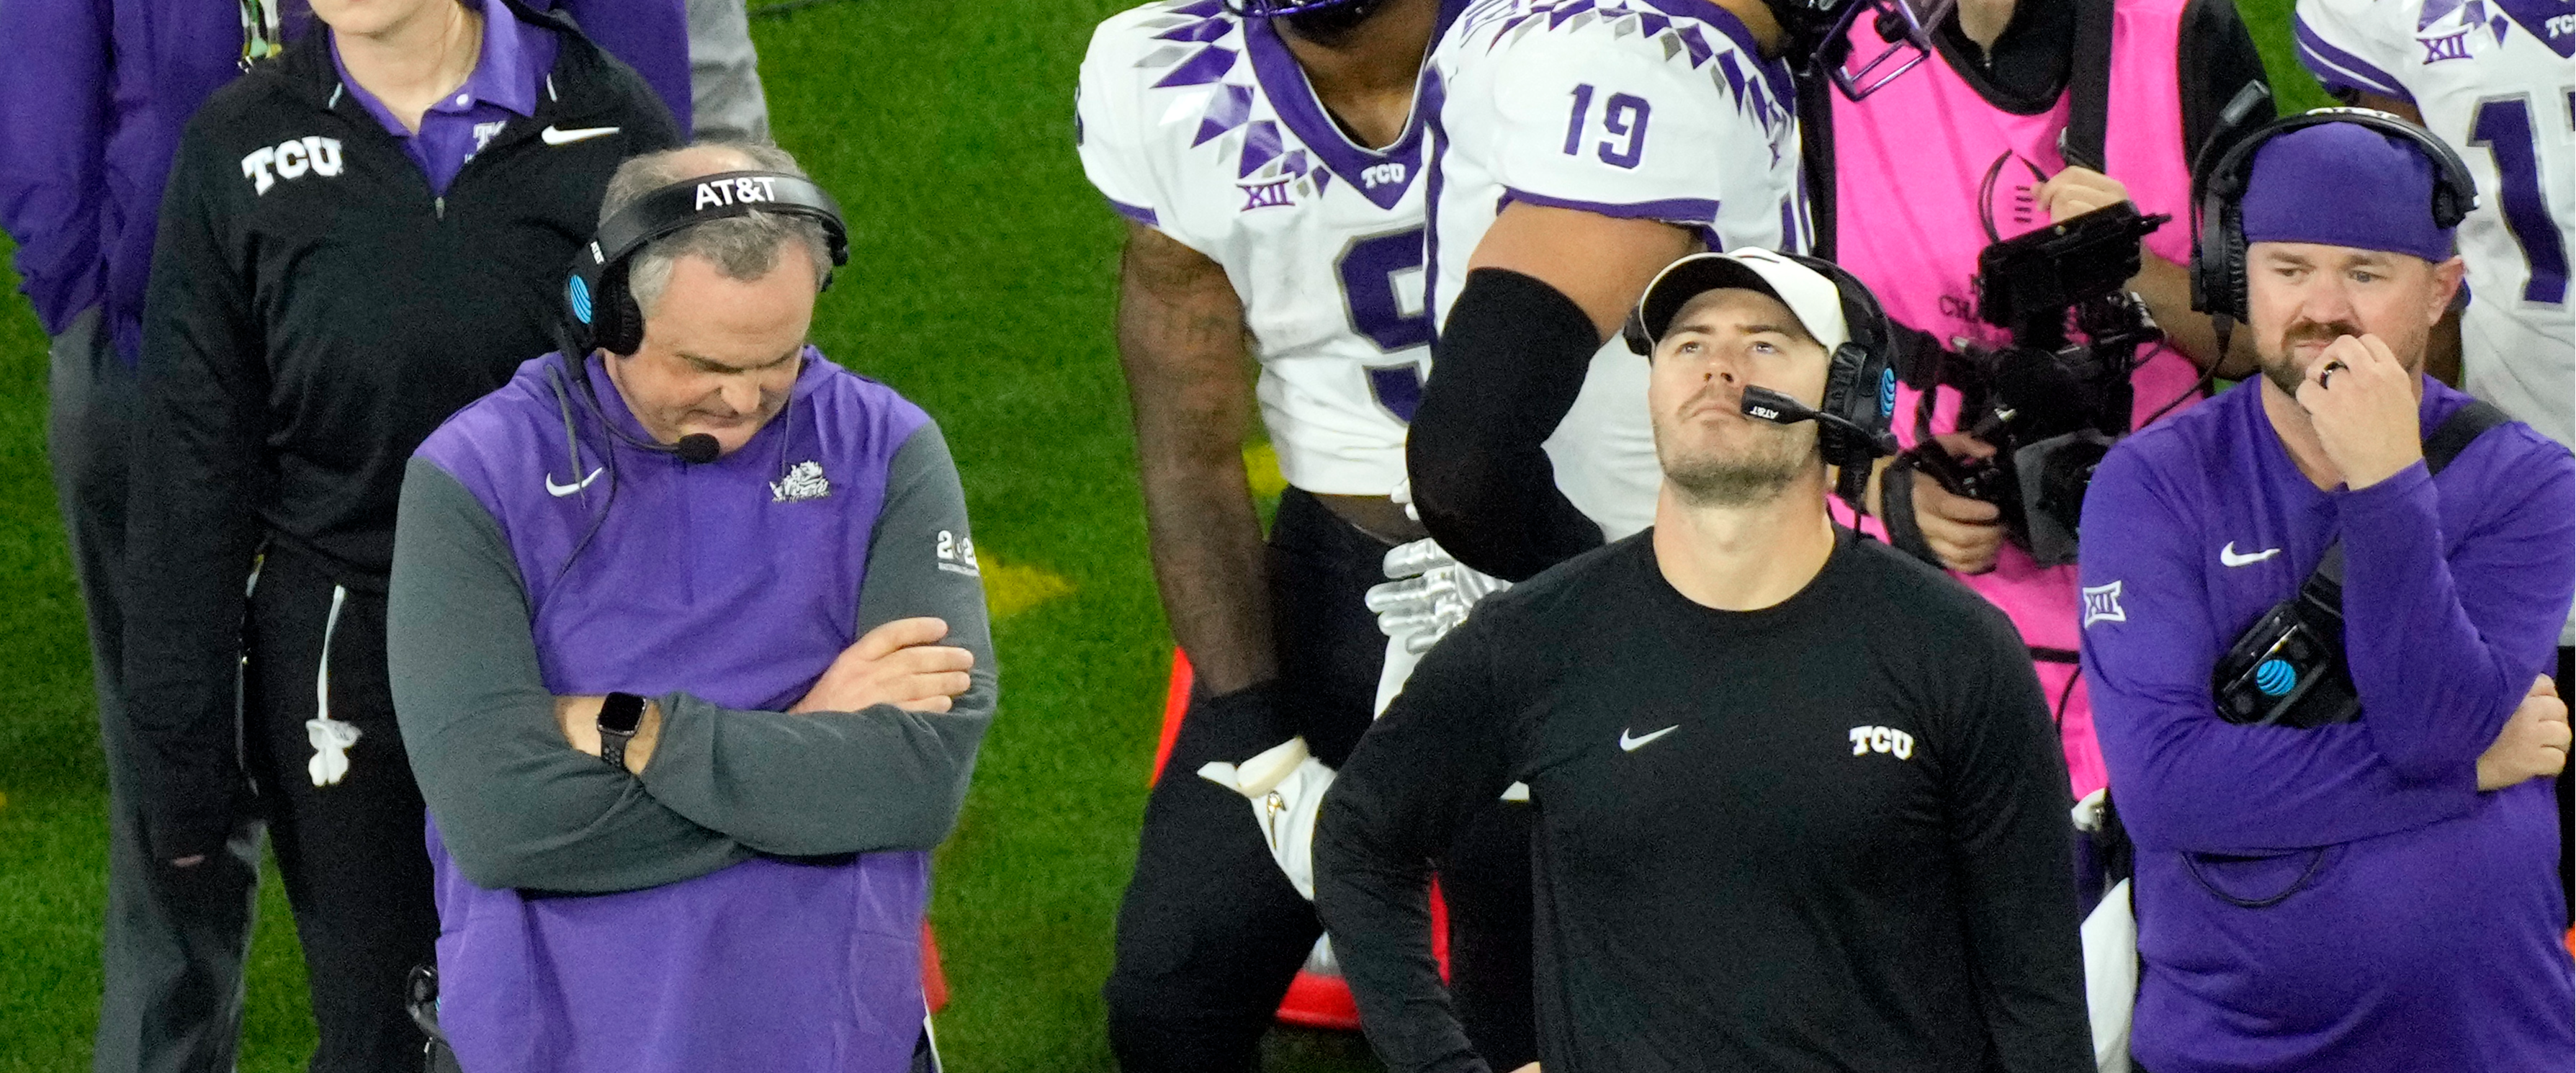 College Football Playoff: The 4 most deserving teams got in and the ratings suffered because of it